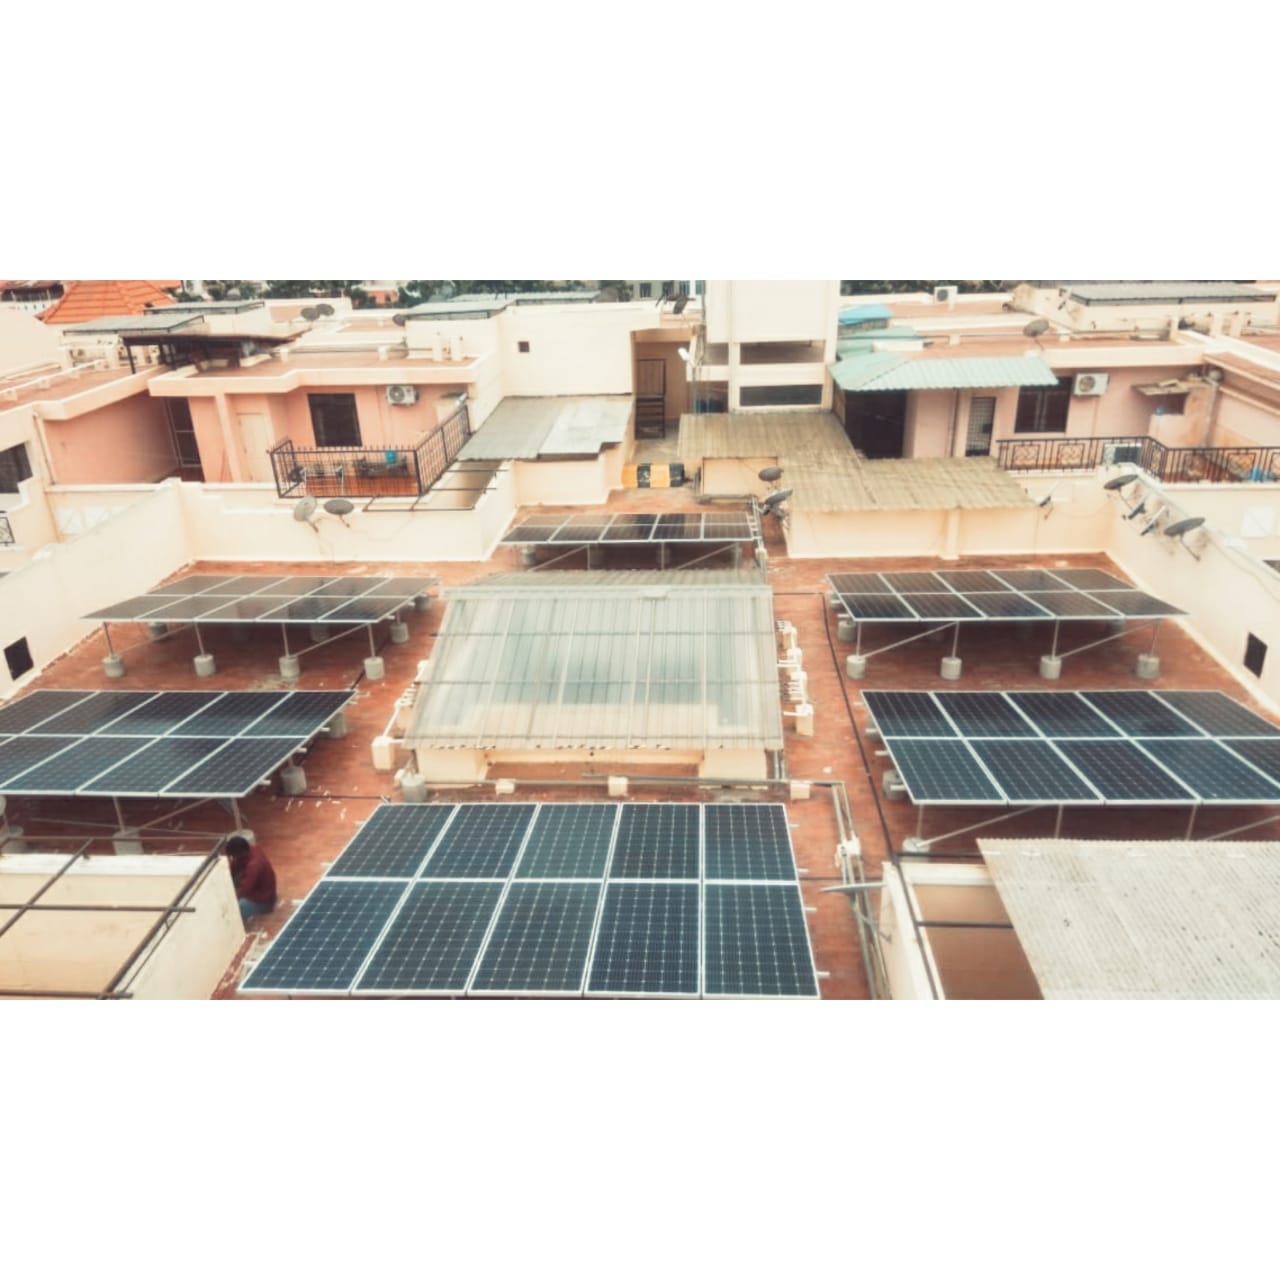 Solar Panels installed at site